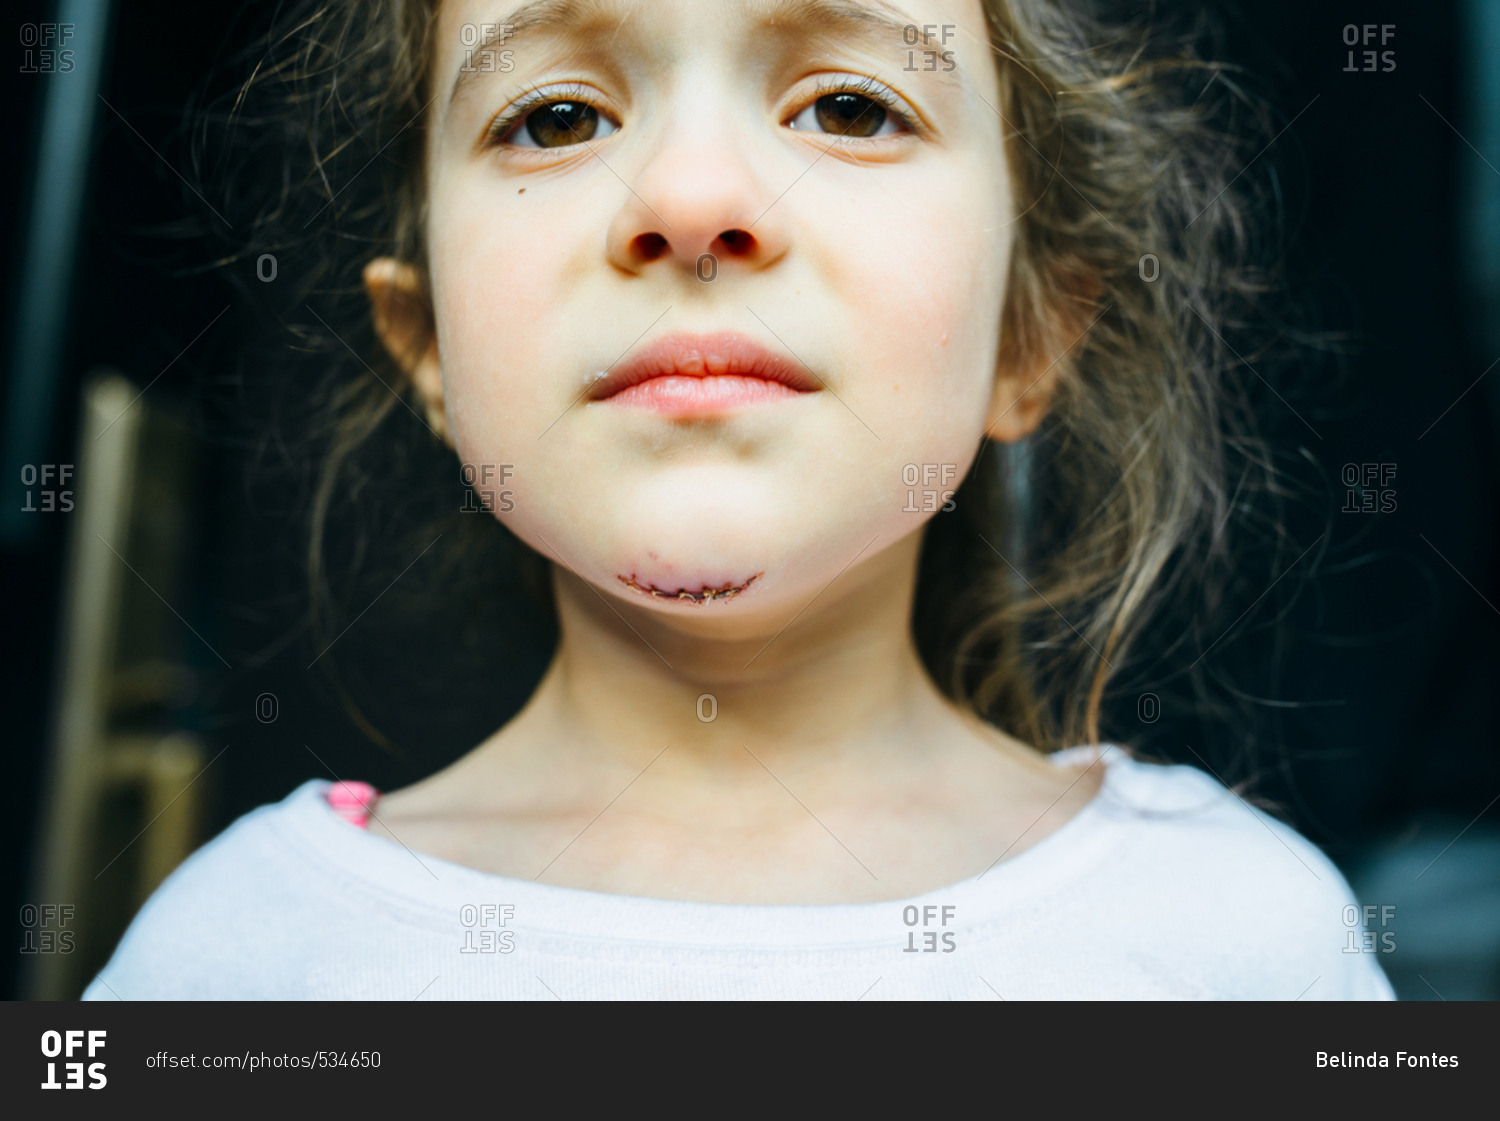 Little girl with fresh stitches on her chin